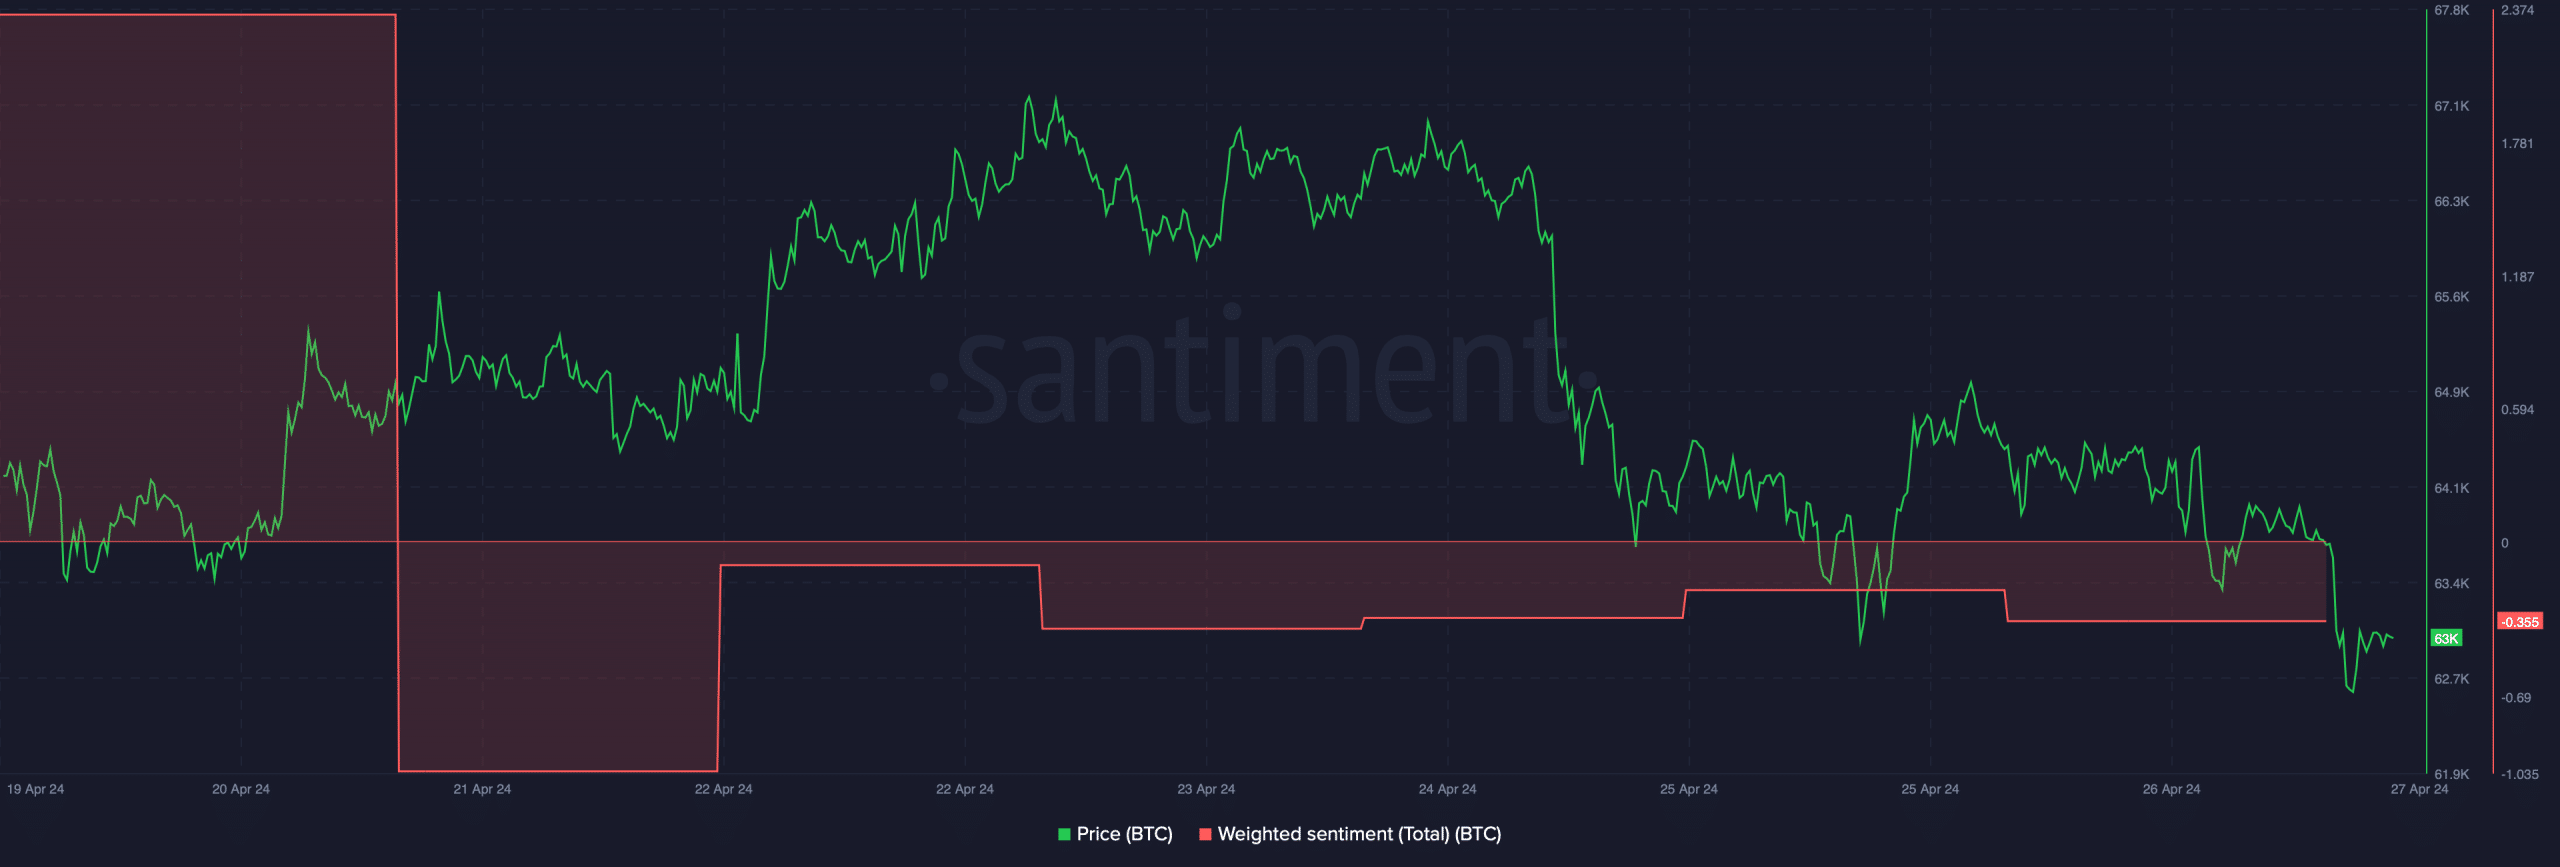 Bitcoin's weighted sentiment dropped